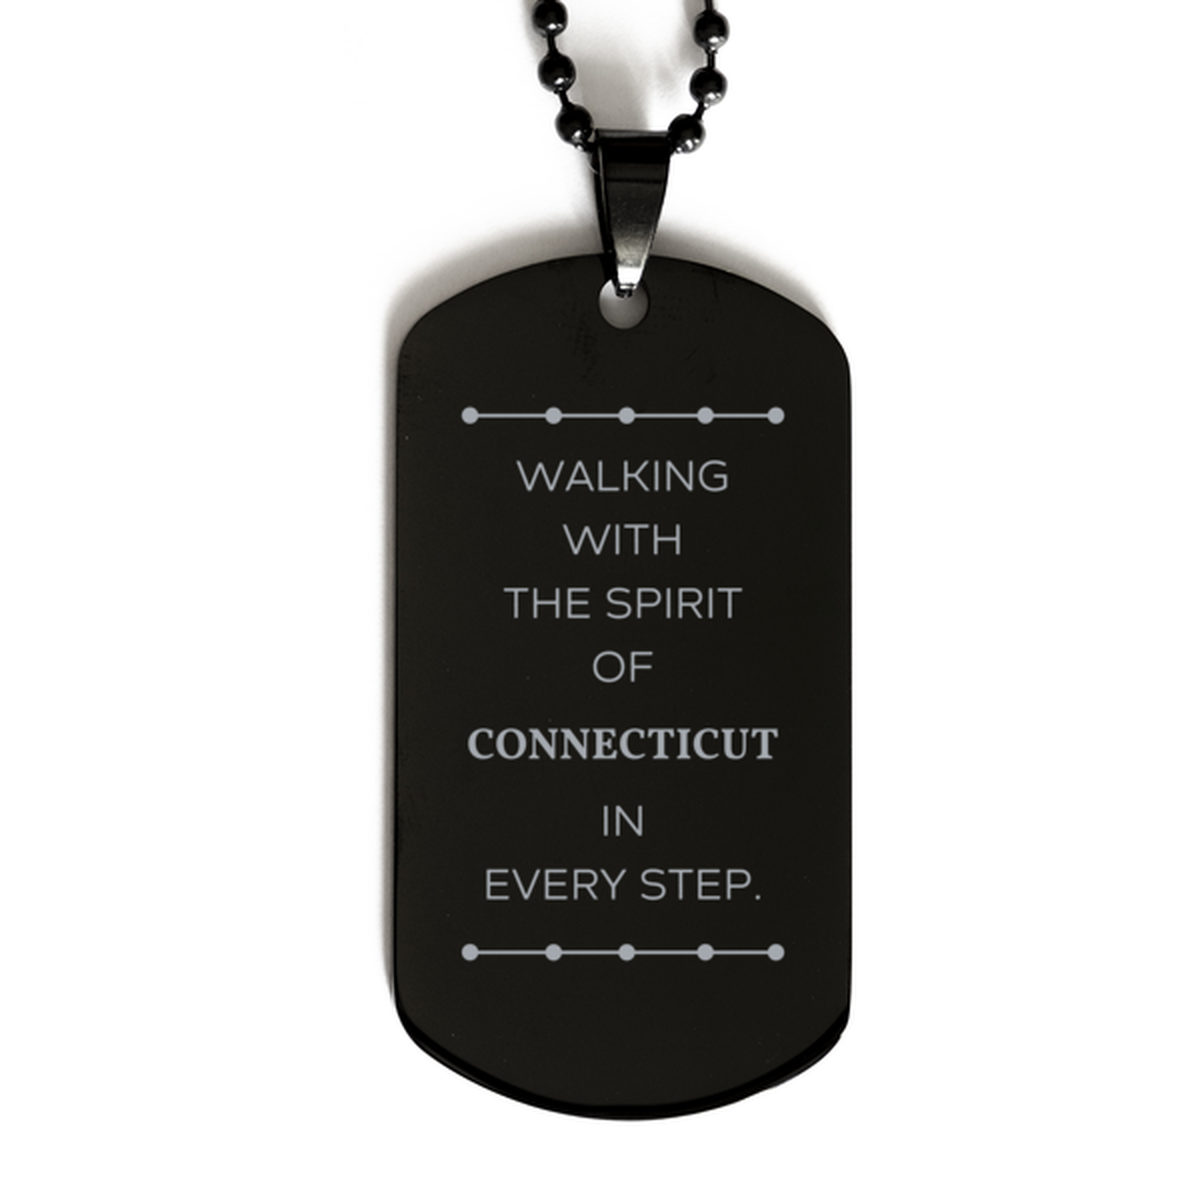 Connecticut Gifts, Walking with the spirit, Love Connecticut Birthday Christmas Black Dog Tag For Connecticut People, Men, Women, Friends